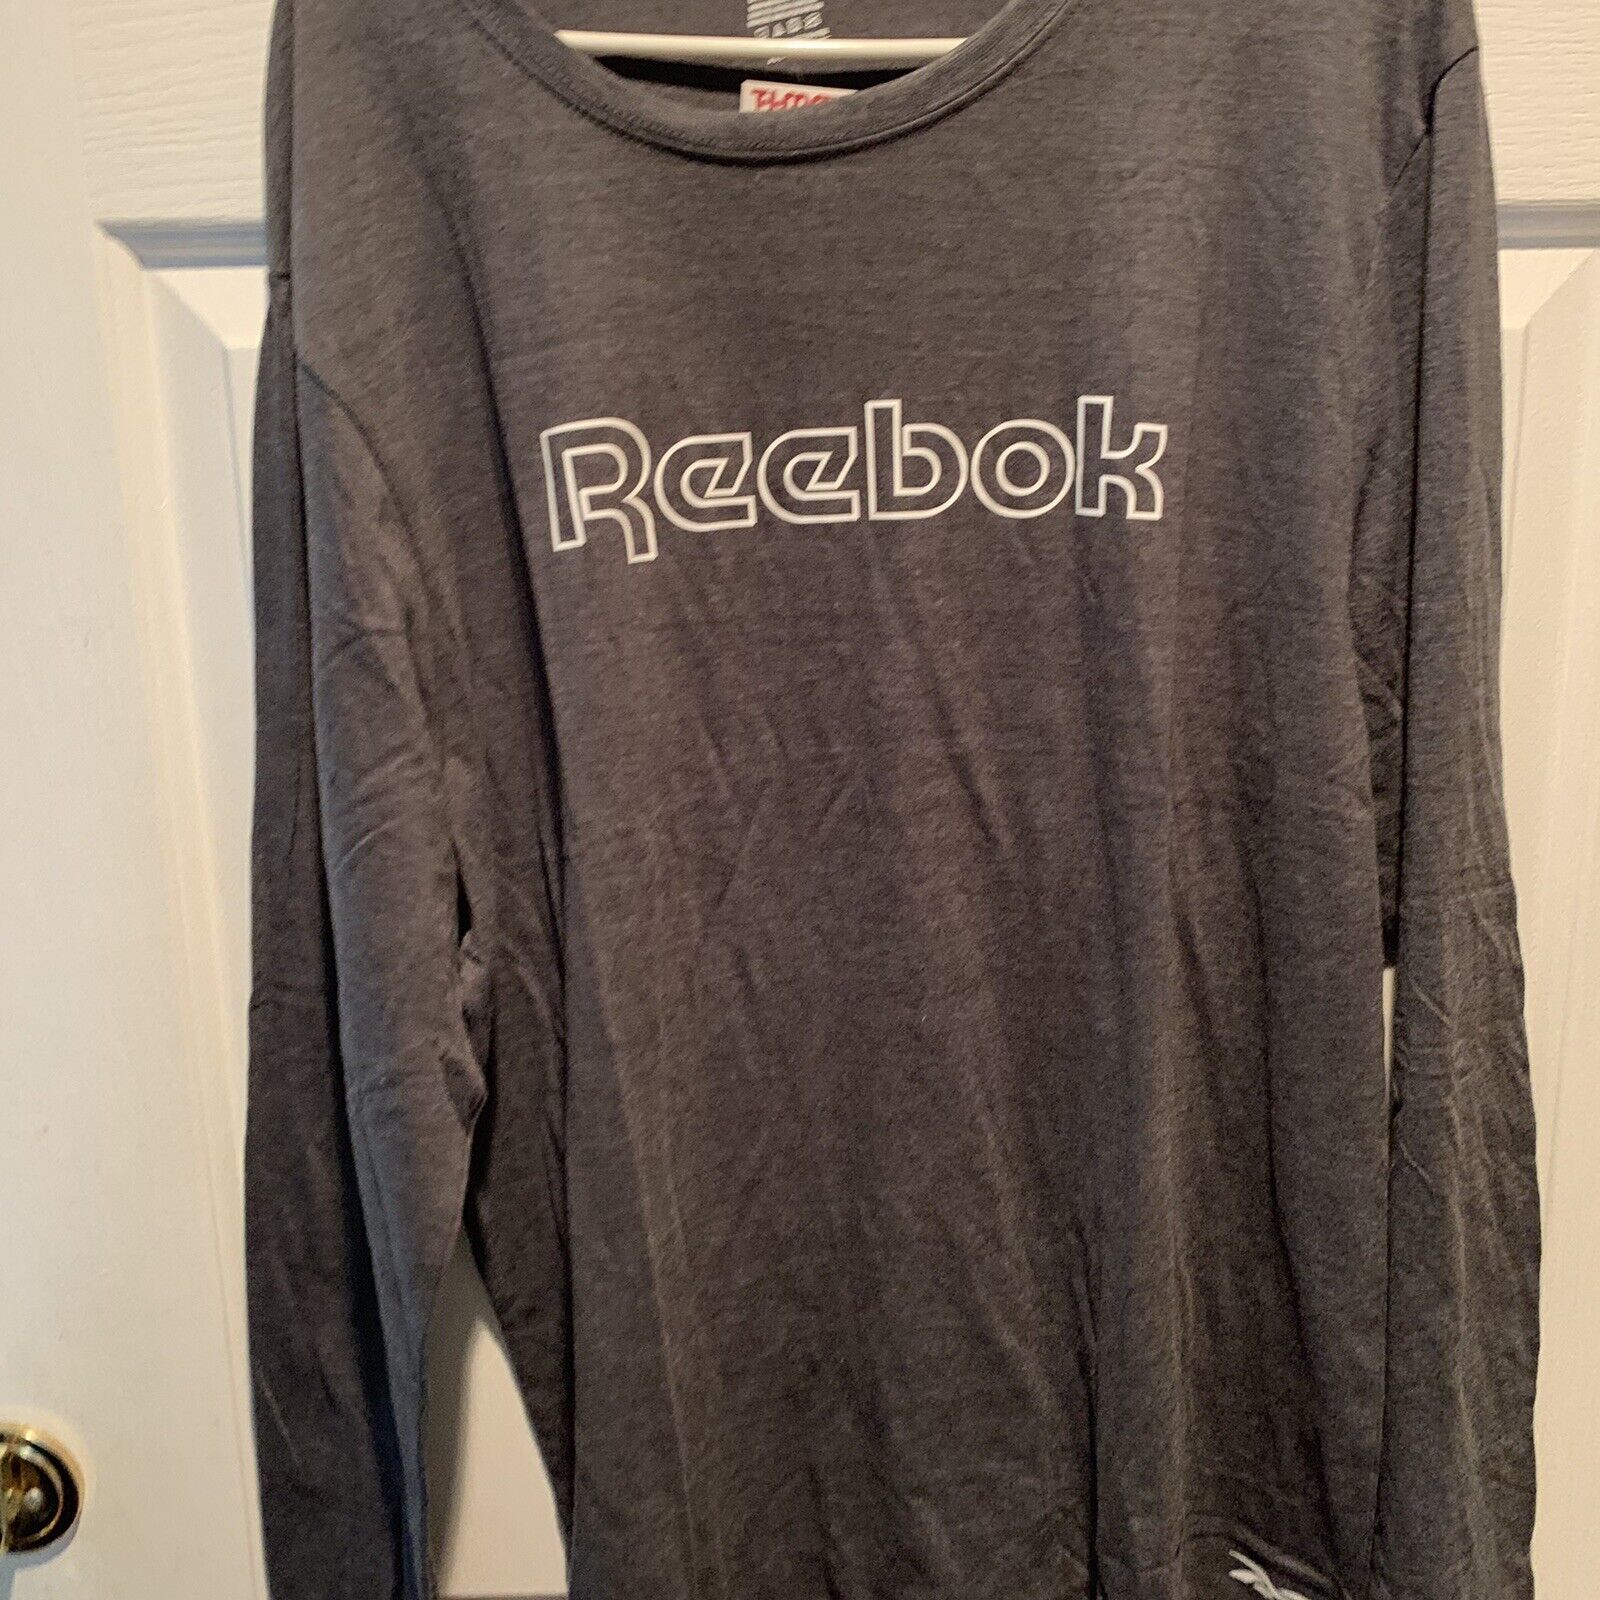 Primary image for Reebok long sleeve shirt Large Hunter Gray #22-0158 New With Tags